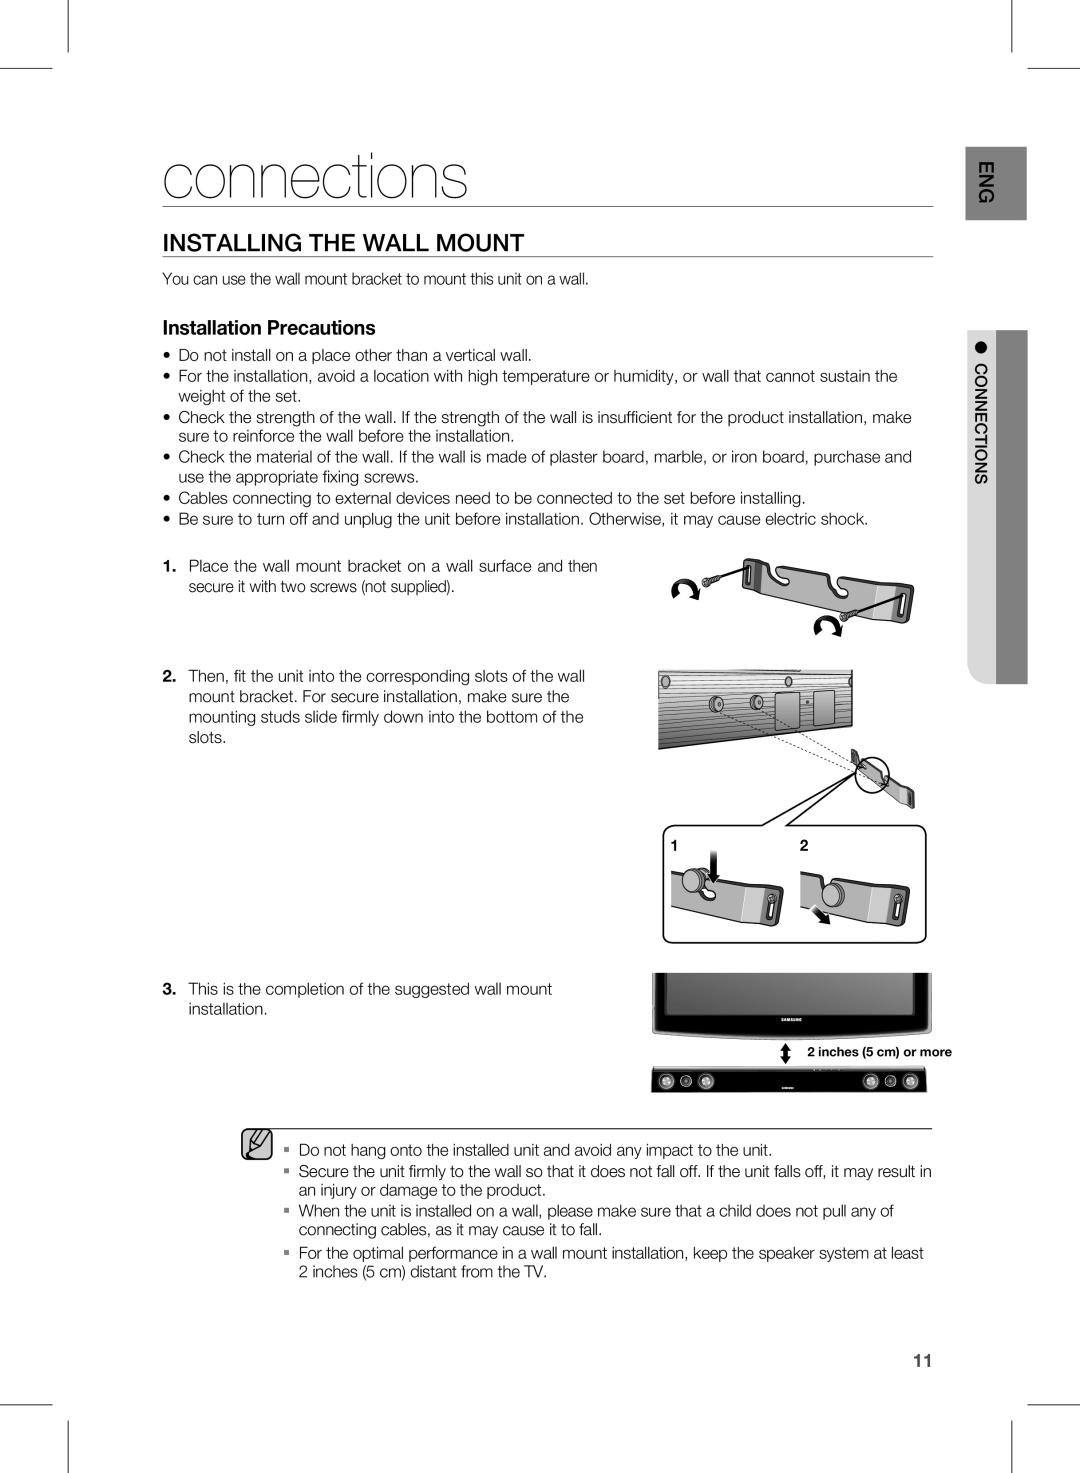 Siemens HW-D450 user manual connections, INSTAllING THE WAll MOUNT, Installation Precautions 